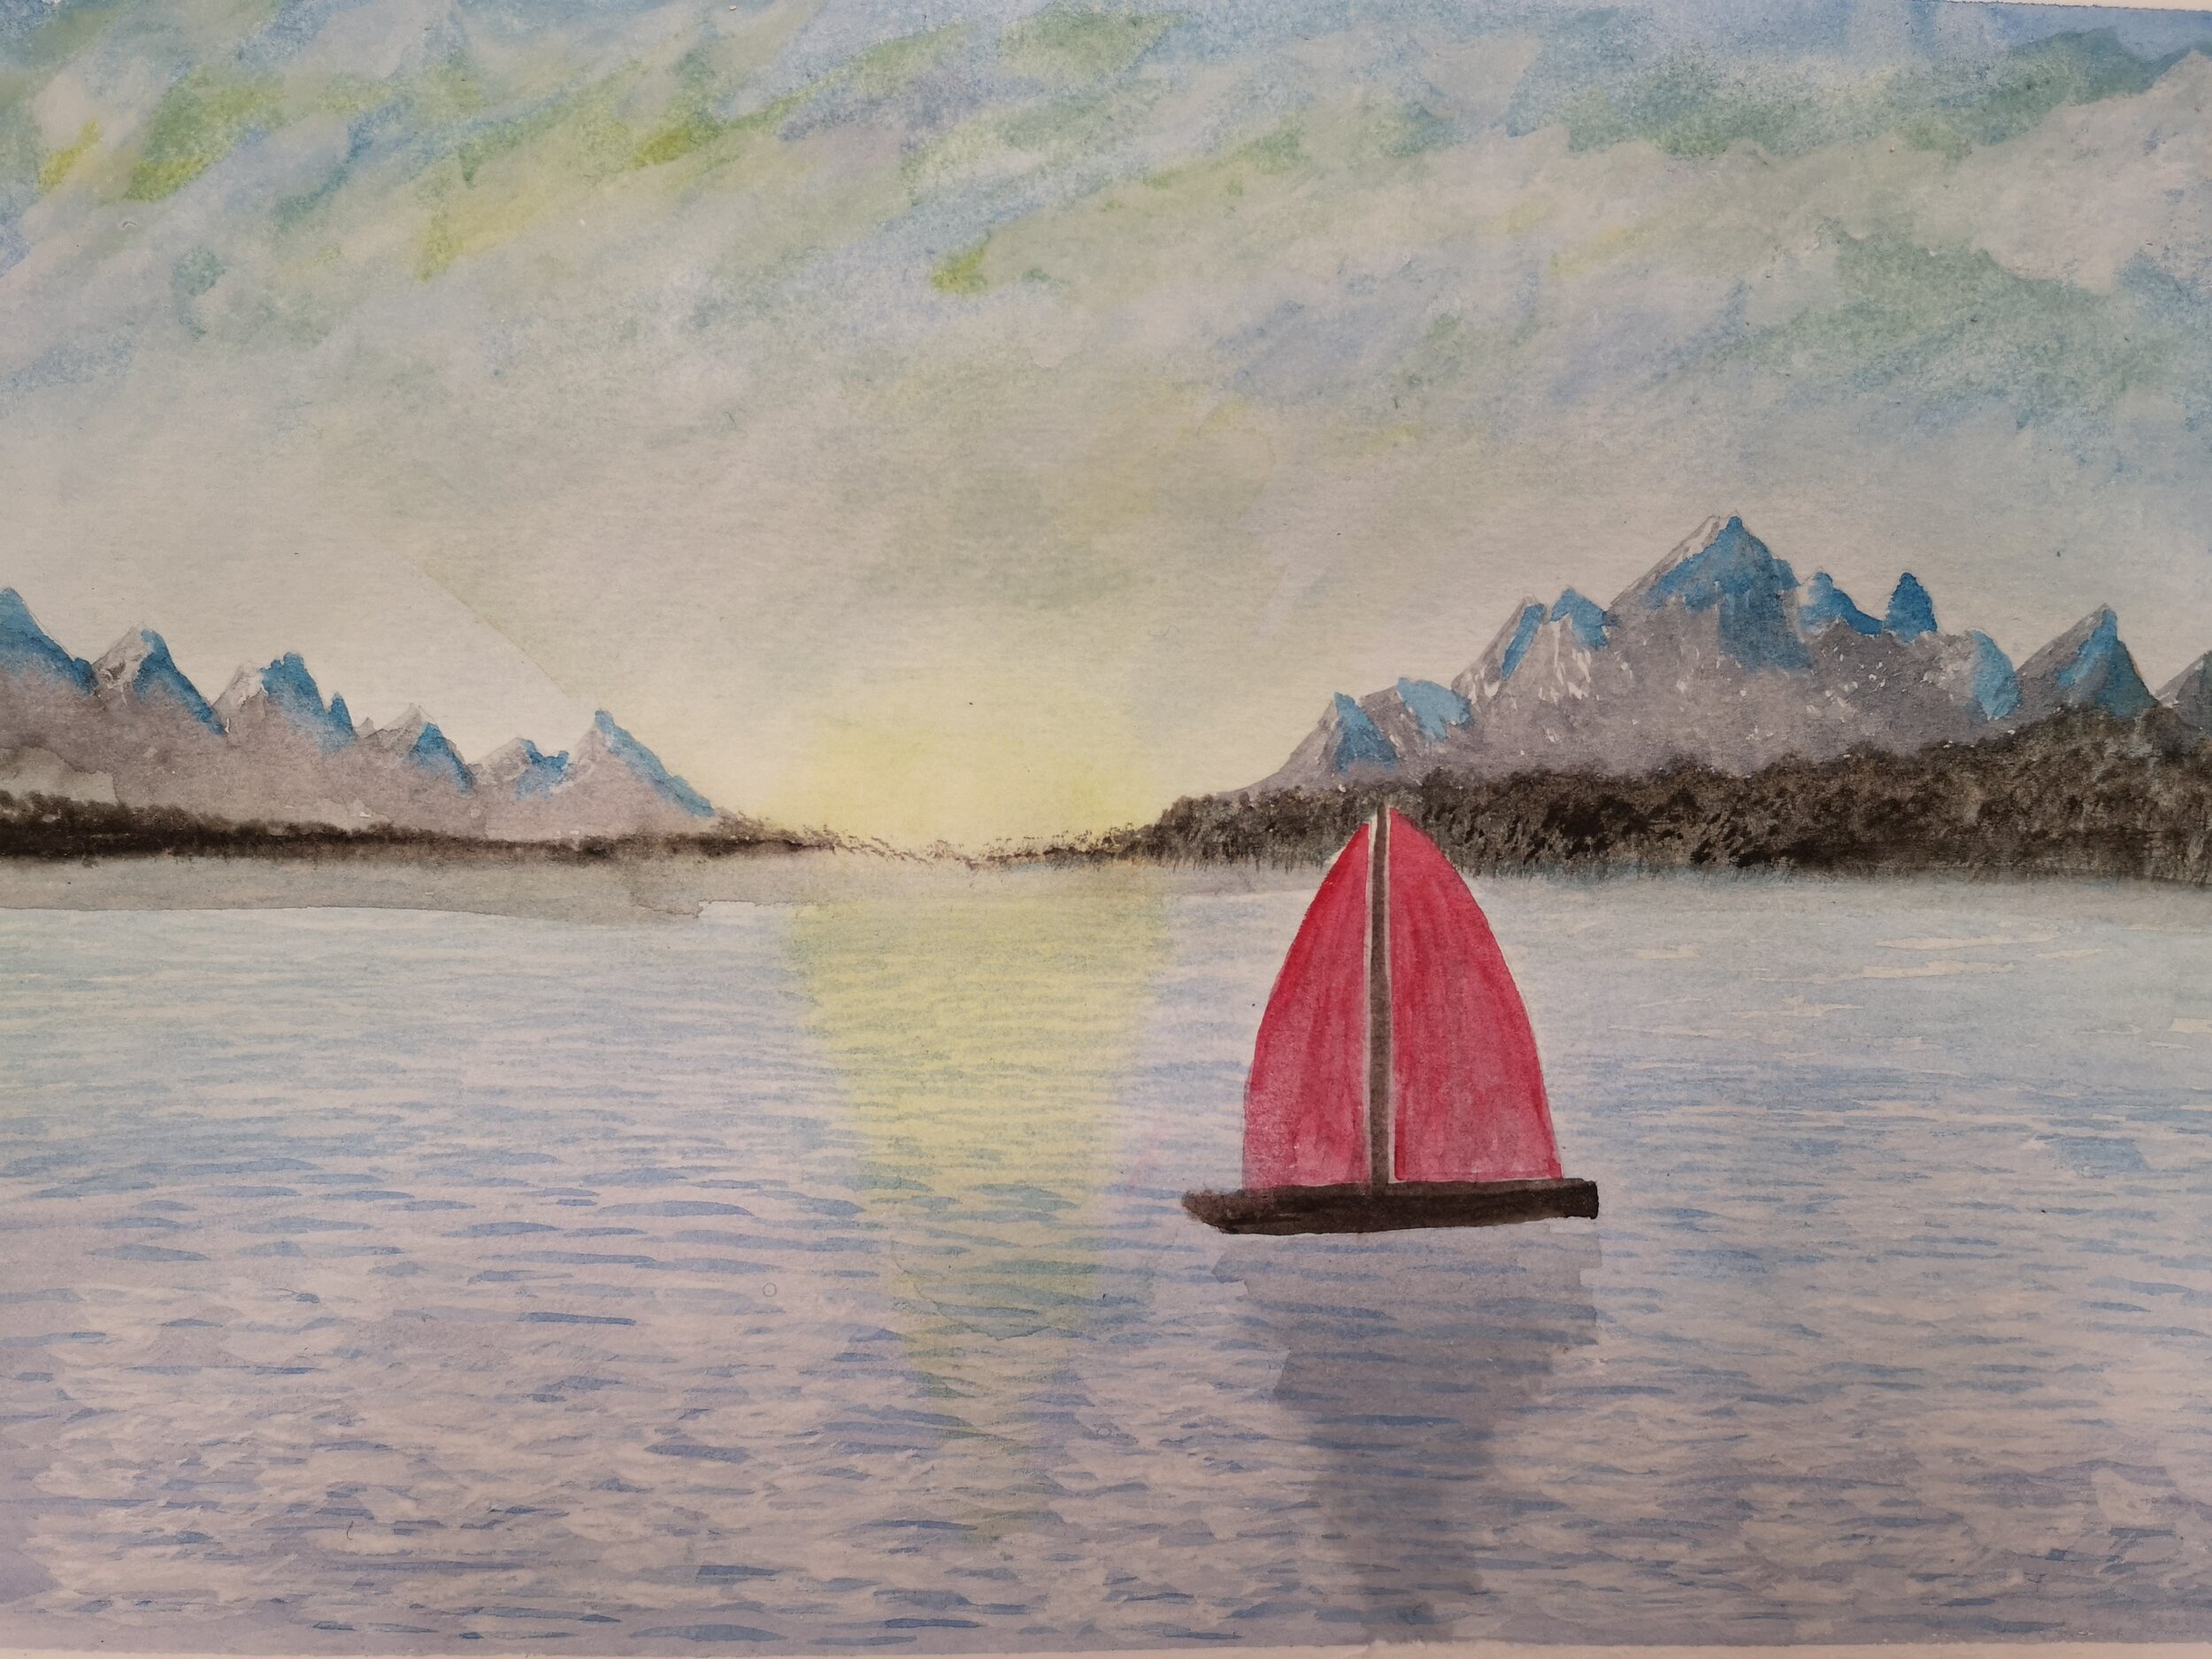 Boating - Original water colour painting of a seascape